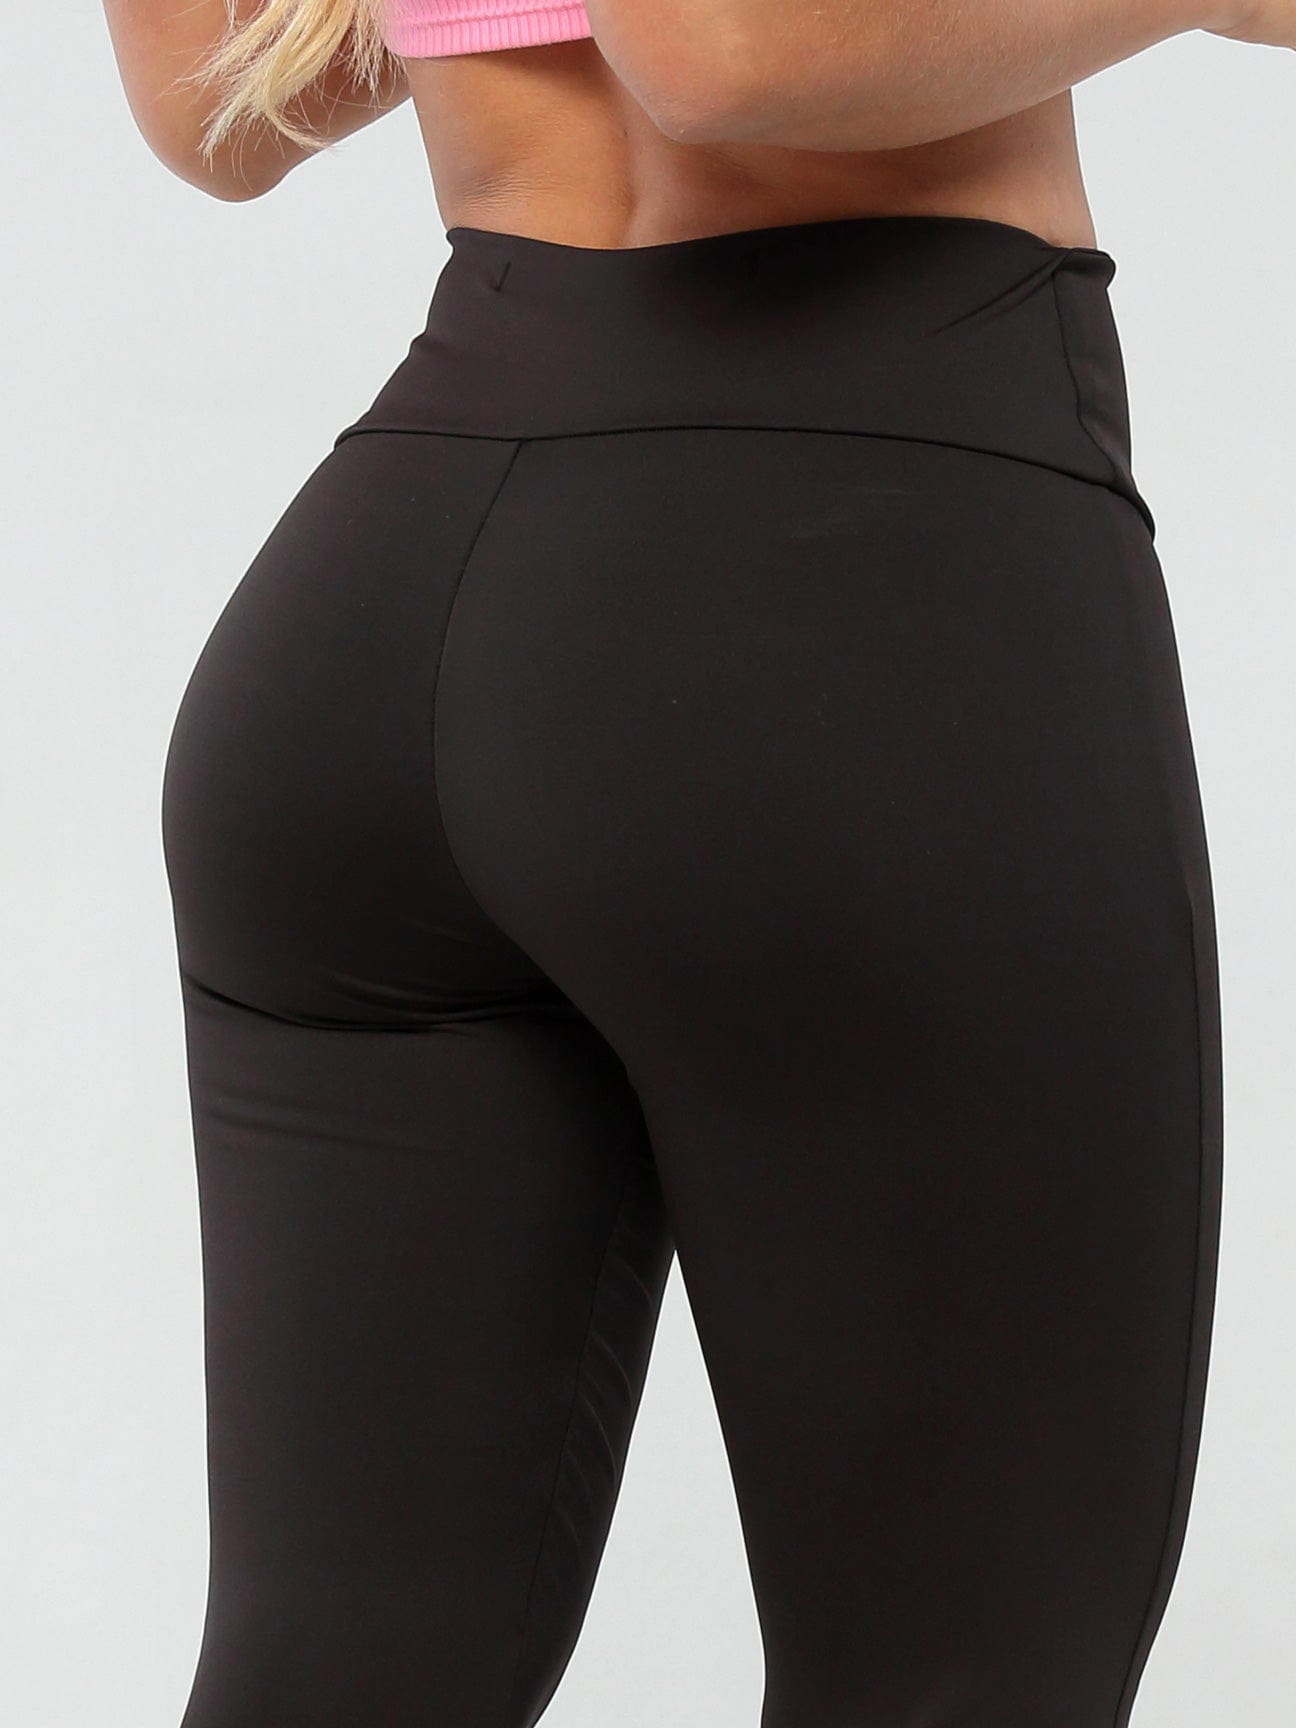 Colombian Butt Lifting Effect Workout Leggings – MIRACLE BODY